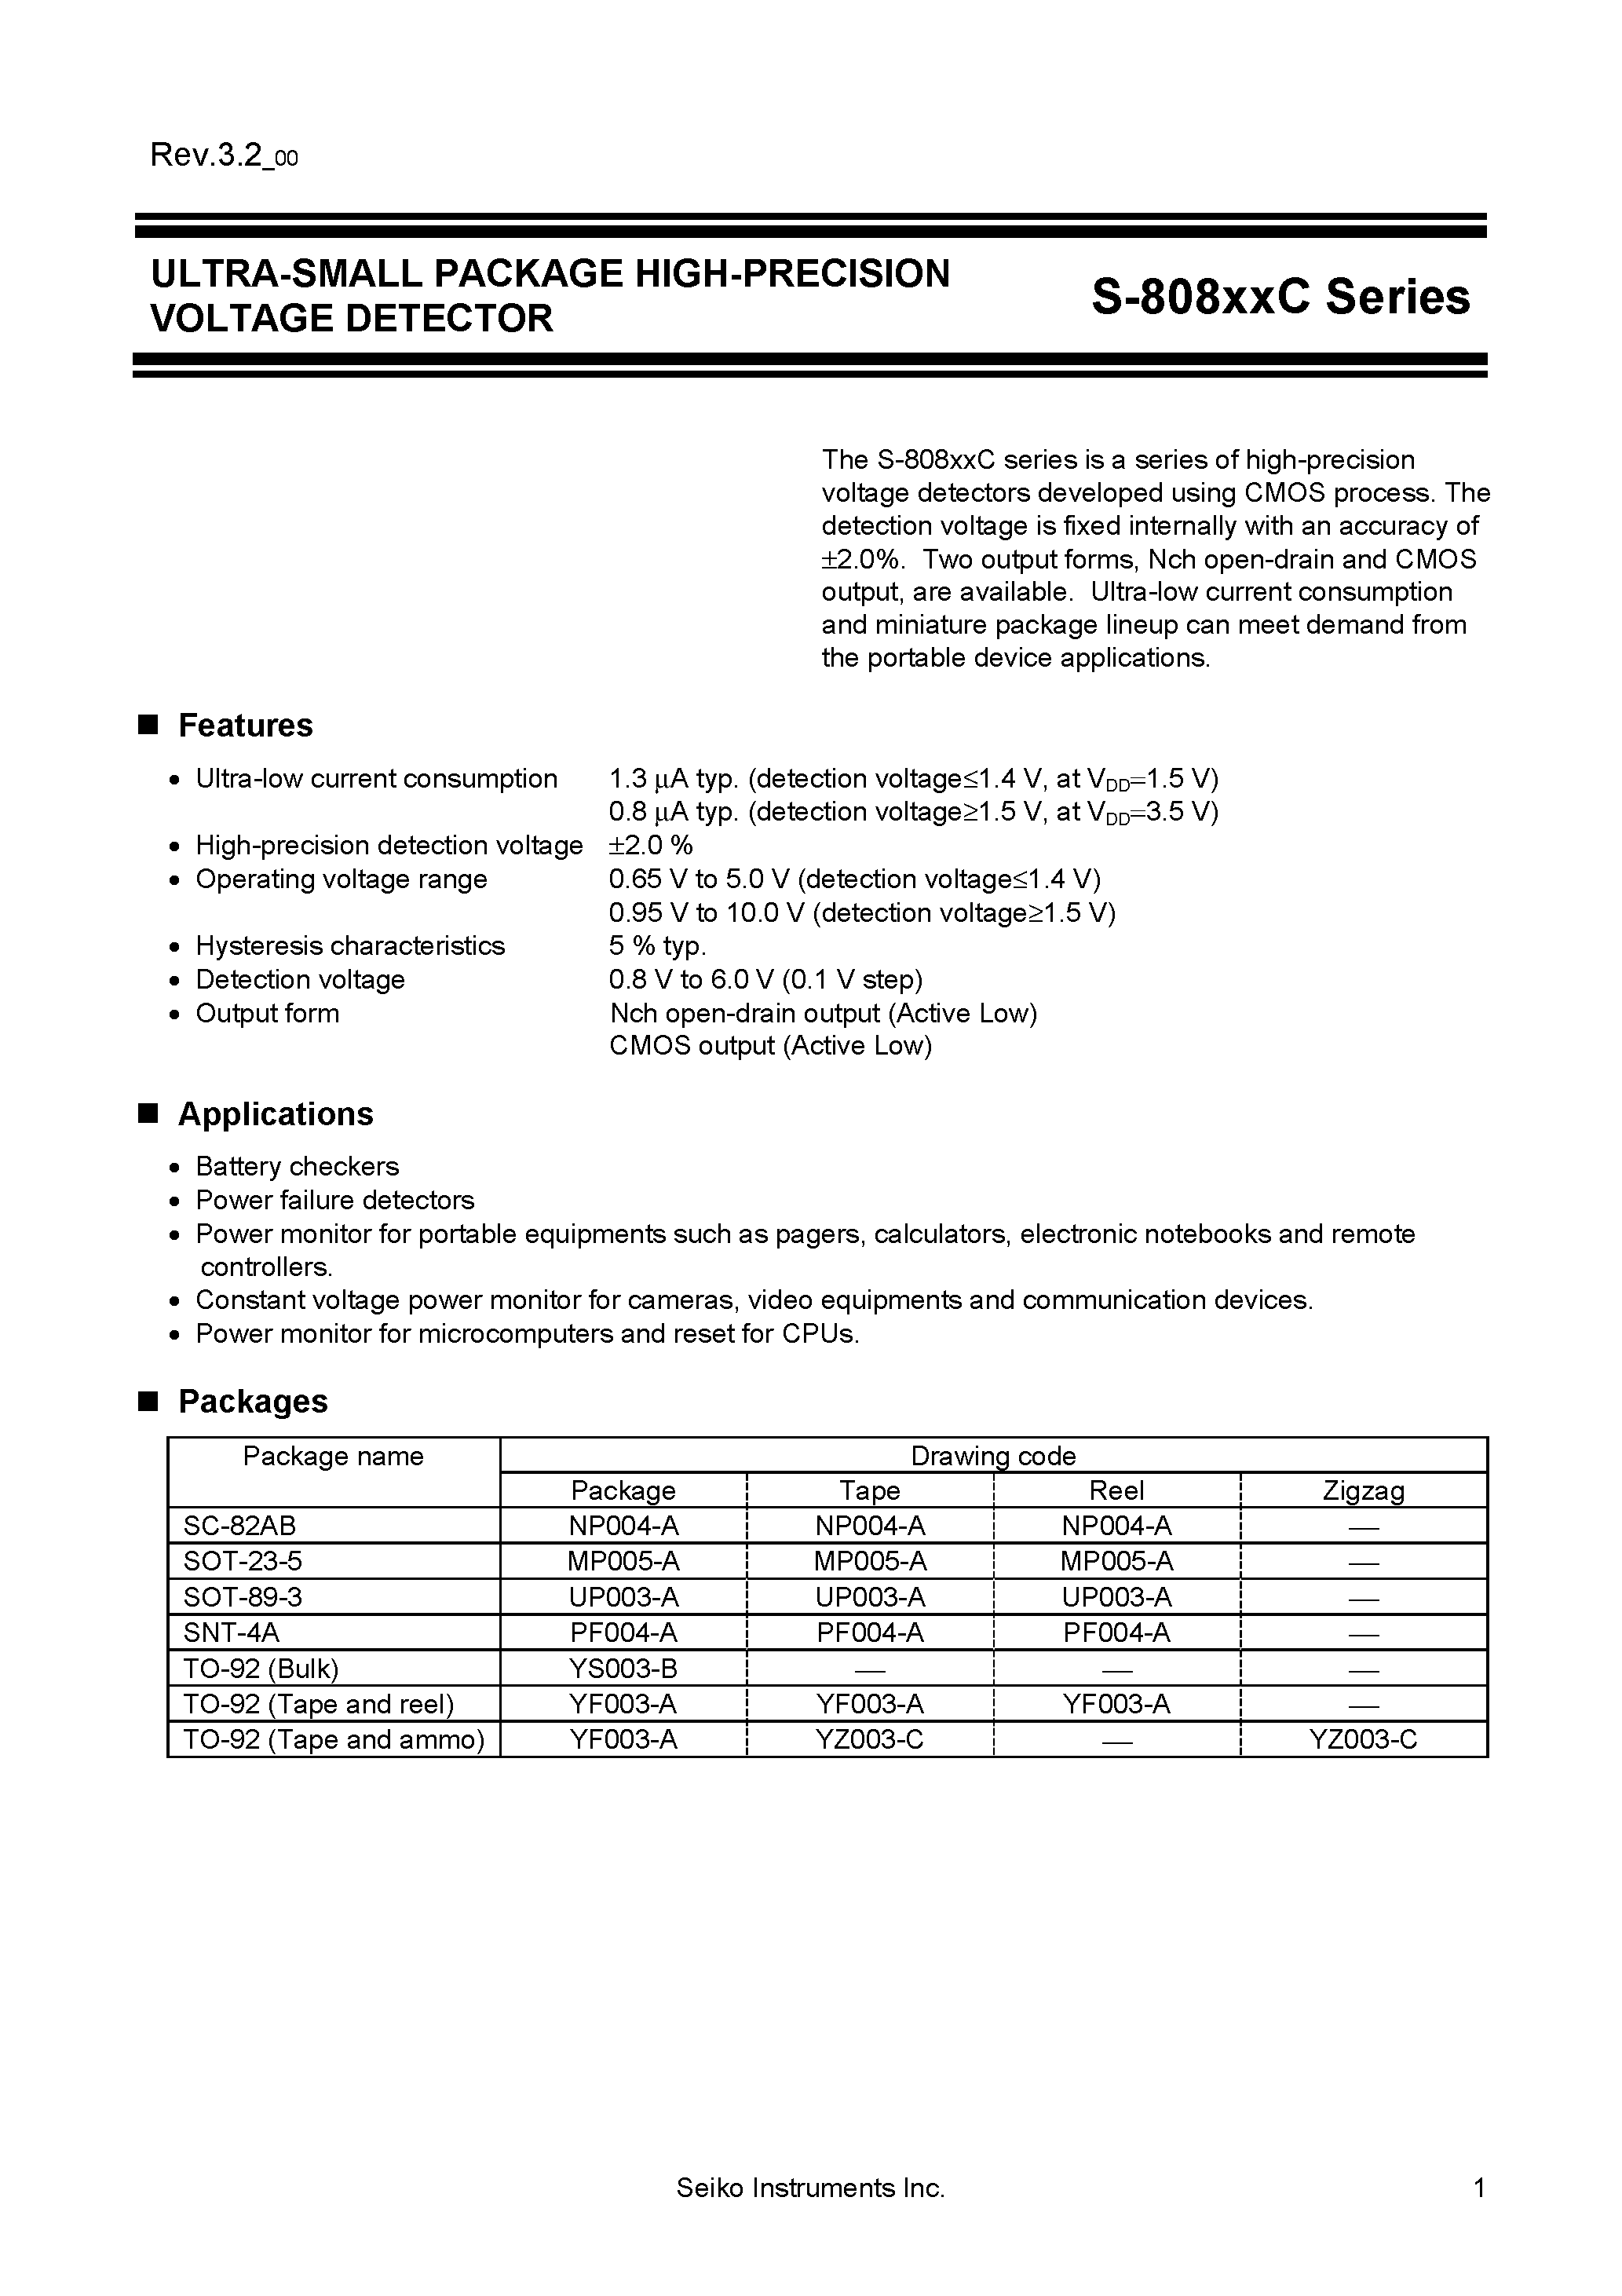 Datasheet S-80830C - (S-808xxC) Ultra-Small Package High Precision Voltage Detector page 1